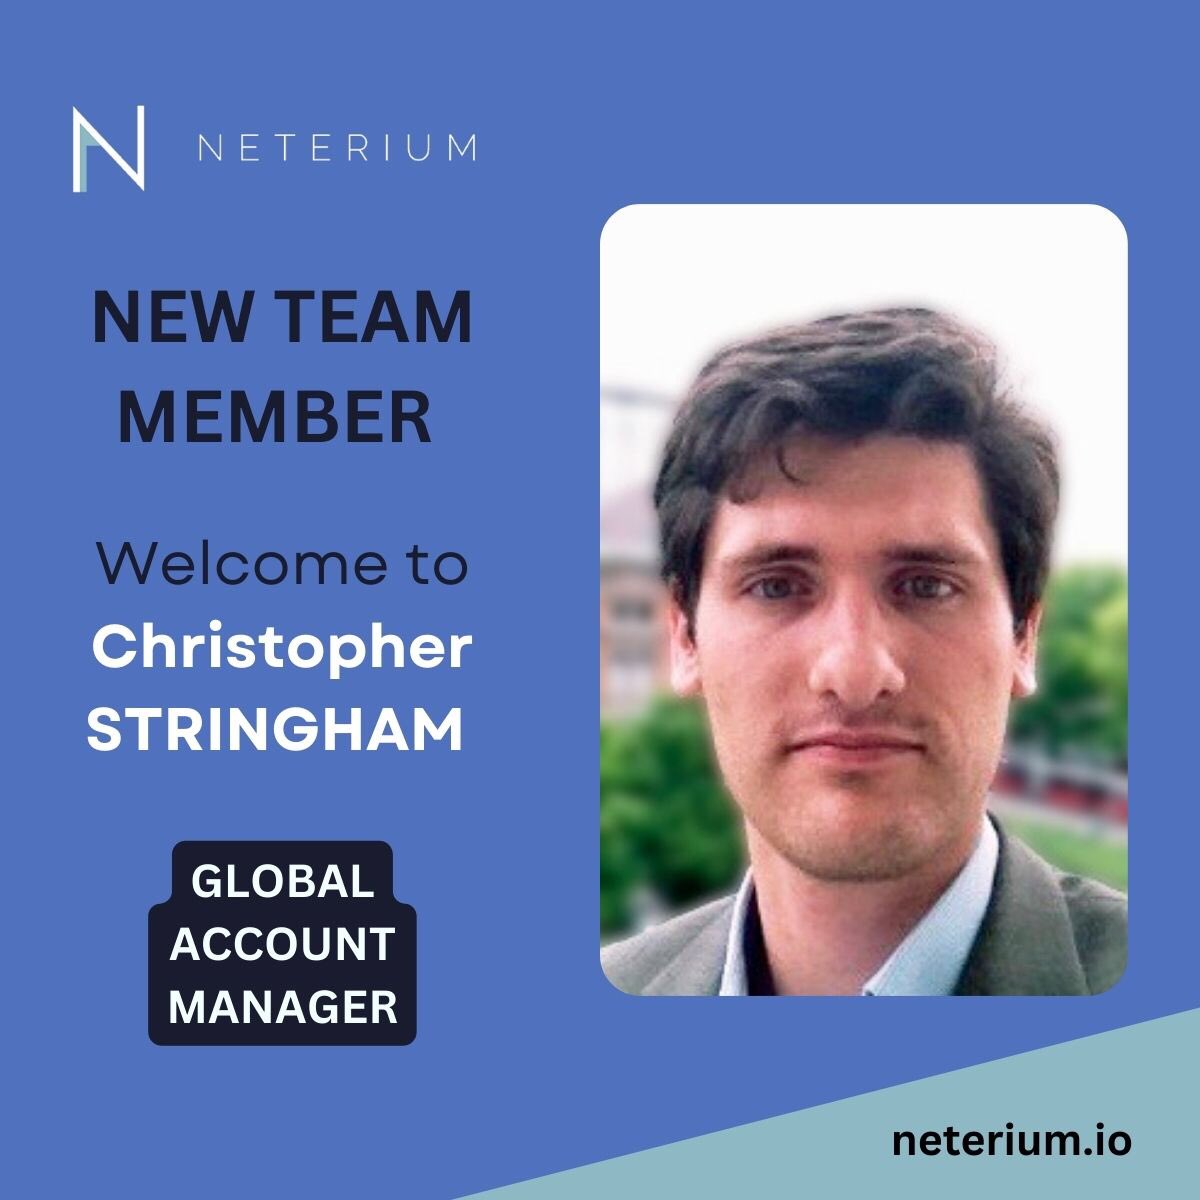 #WeAreGrowing

#Neterium welcomes new talents to support its global ambitions

🤩Welcome to Pascal Alberty as new Systems & Operations Manager

🚀Welcome to Christopher Stringham as new Global Account Manager 

neterium.io

#Team #Talent #Fintech #GlobalLeader #FCC